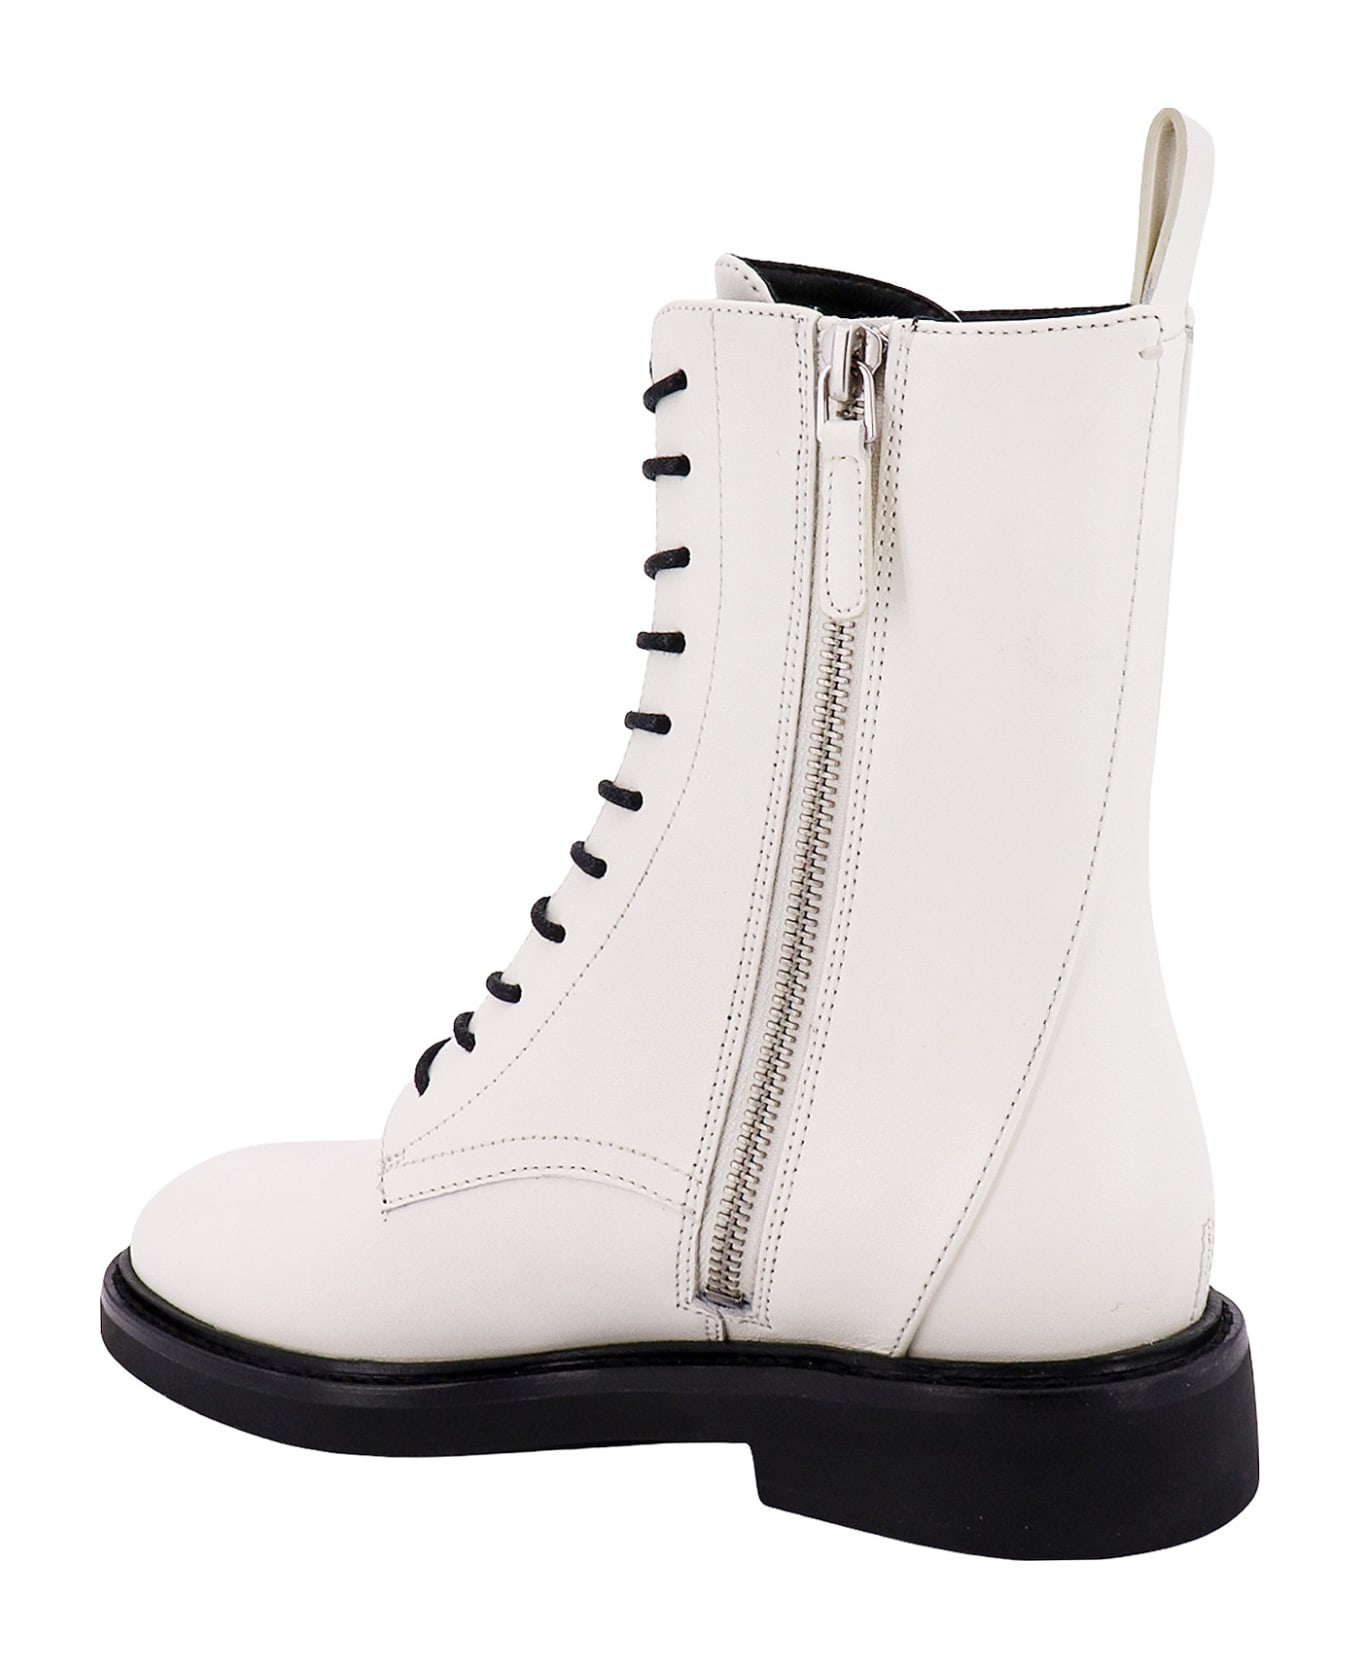 Tory Burch Double T Ankle Boots - White